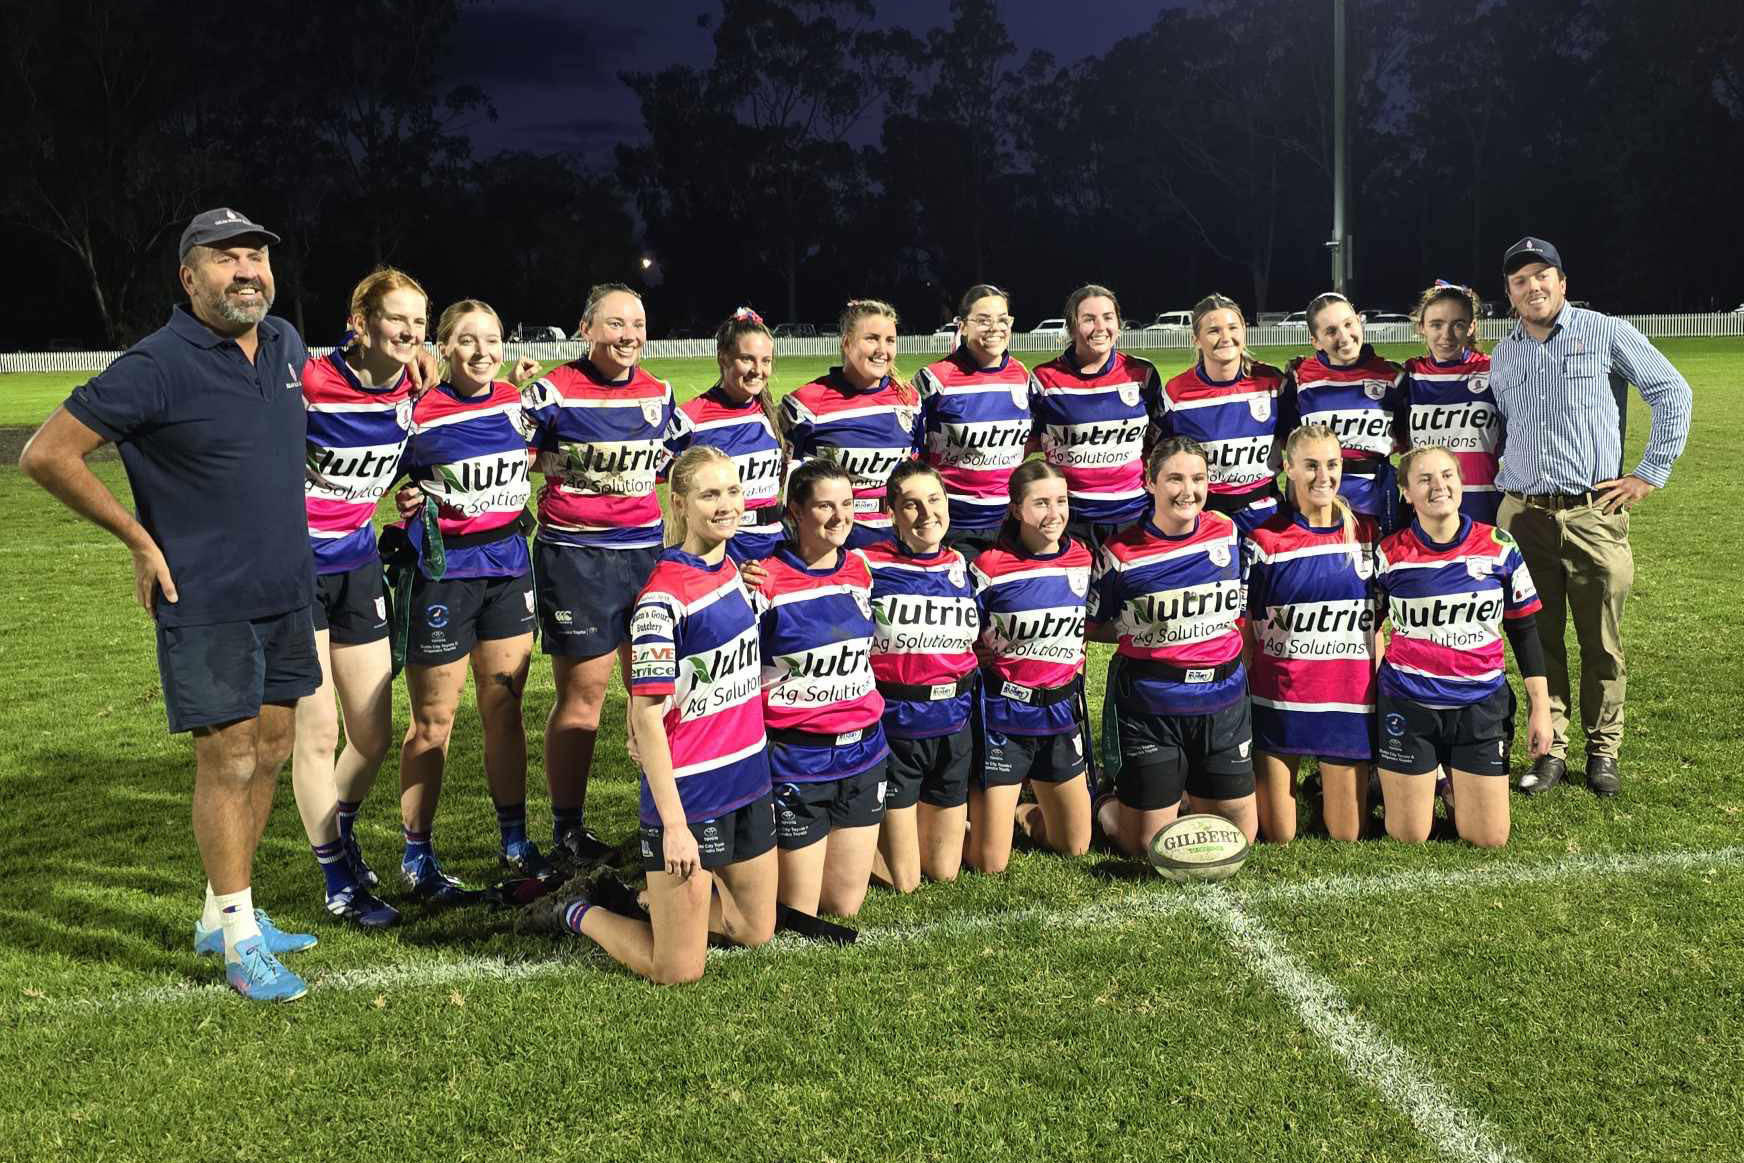 The Flamin’ Galahs had a historic 12-5 win against Walgett Ewes at McGrane Oval on Saturday, May 11. It was the Galahs’ first win against the Ewes, and the Ewes’ first-ever loss, according to this report. Photo by Gulargambone Rugby Union Club.